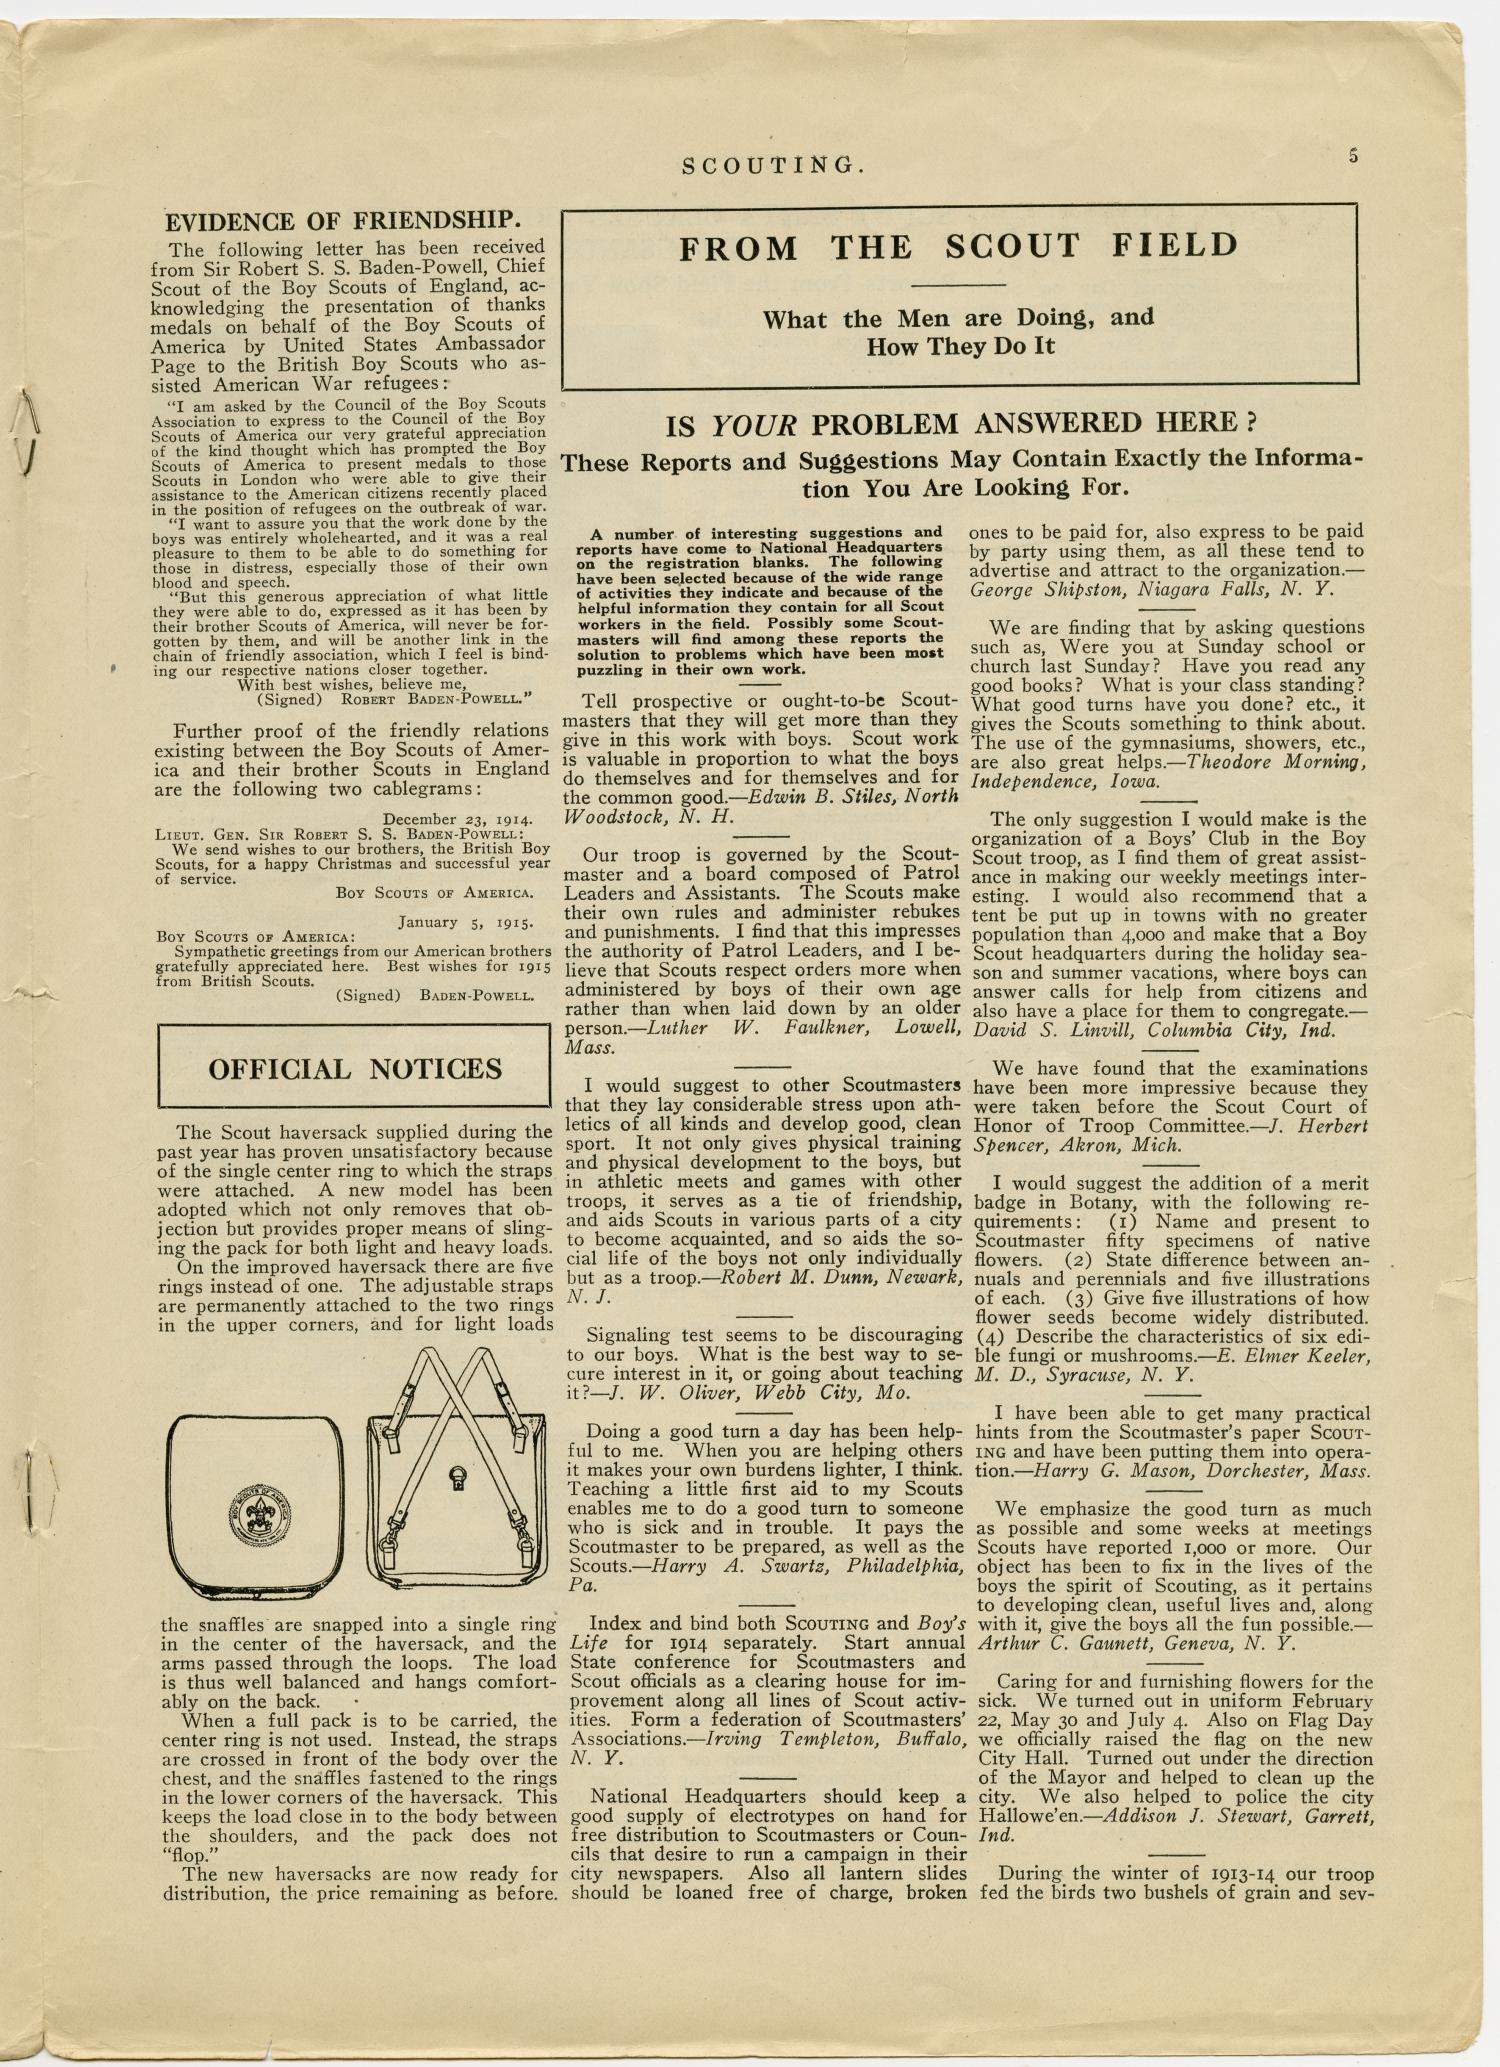 Scouting, Volume 2, Number 18, January 15, 1915
                                                
                                                    5
                                                